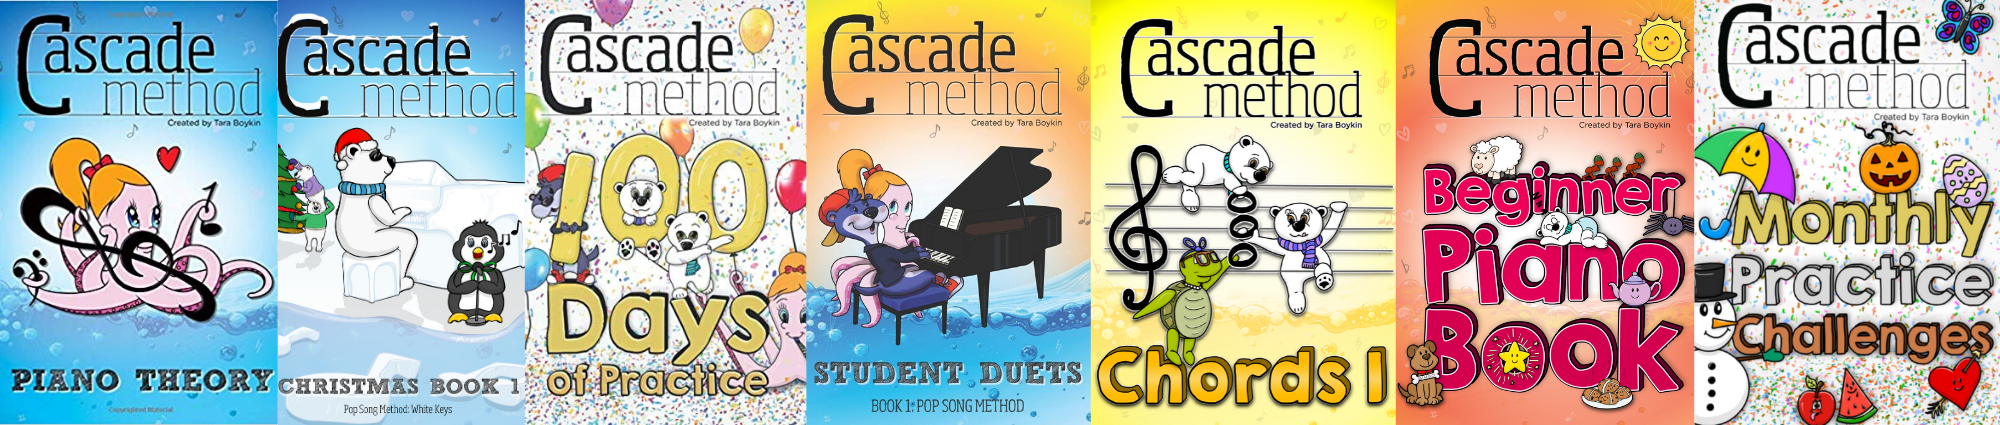 A full collage of the cascade method book collection